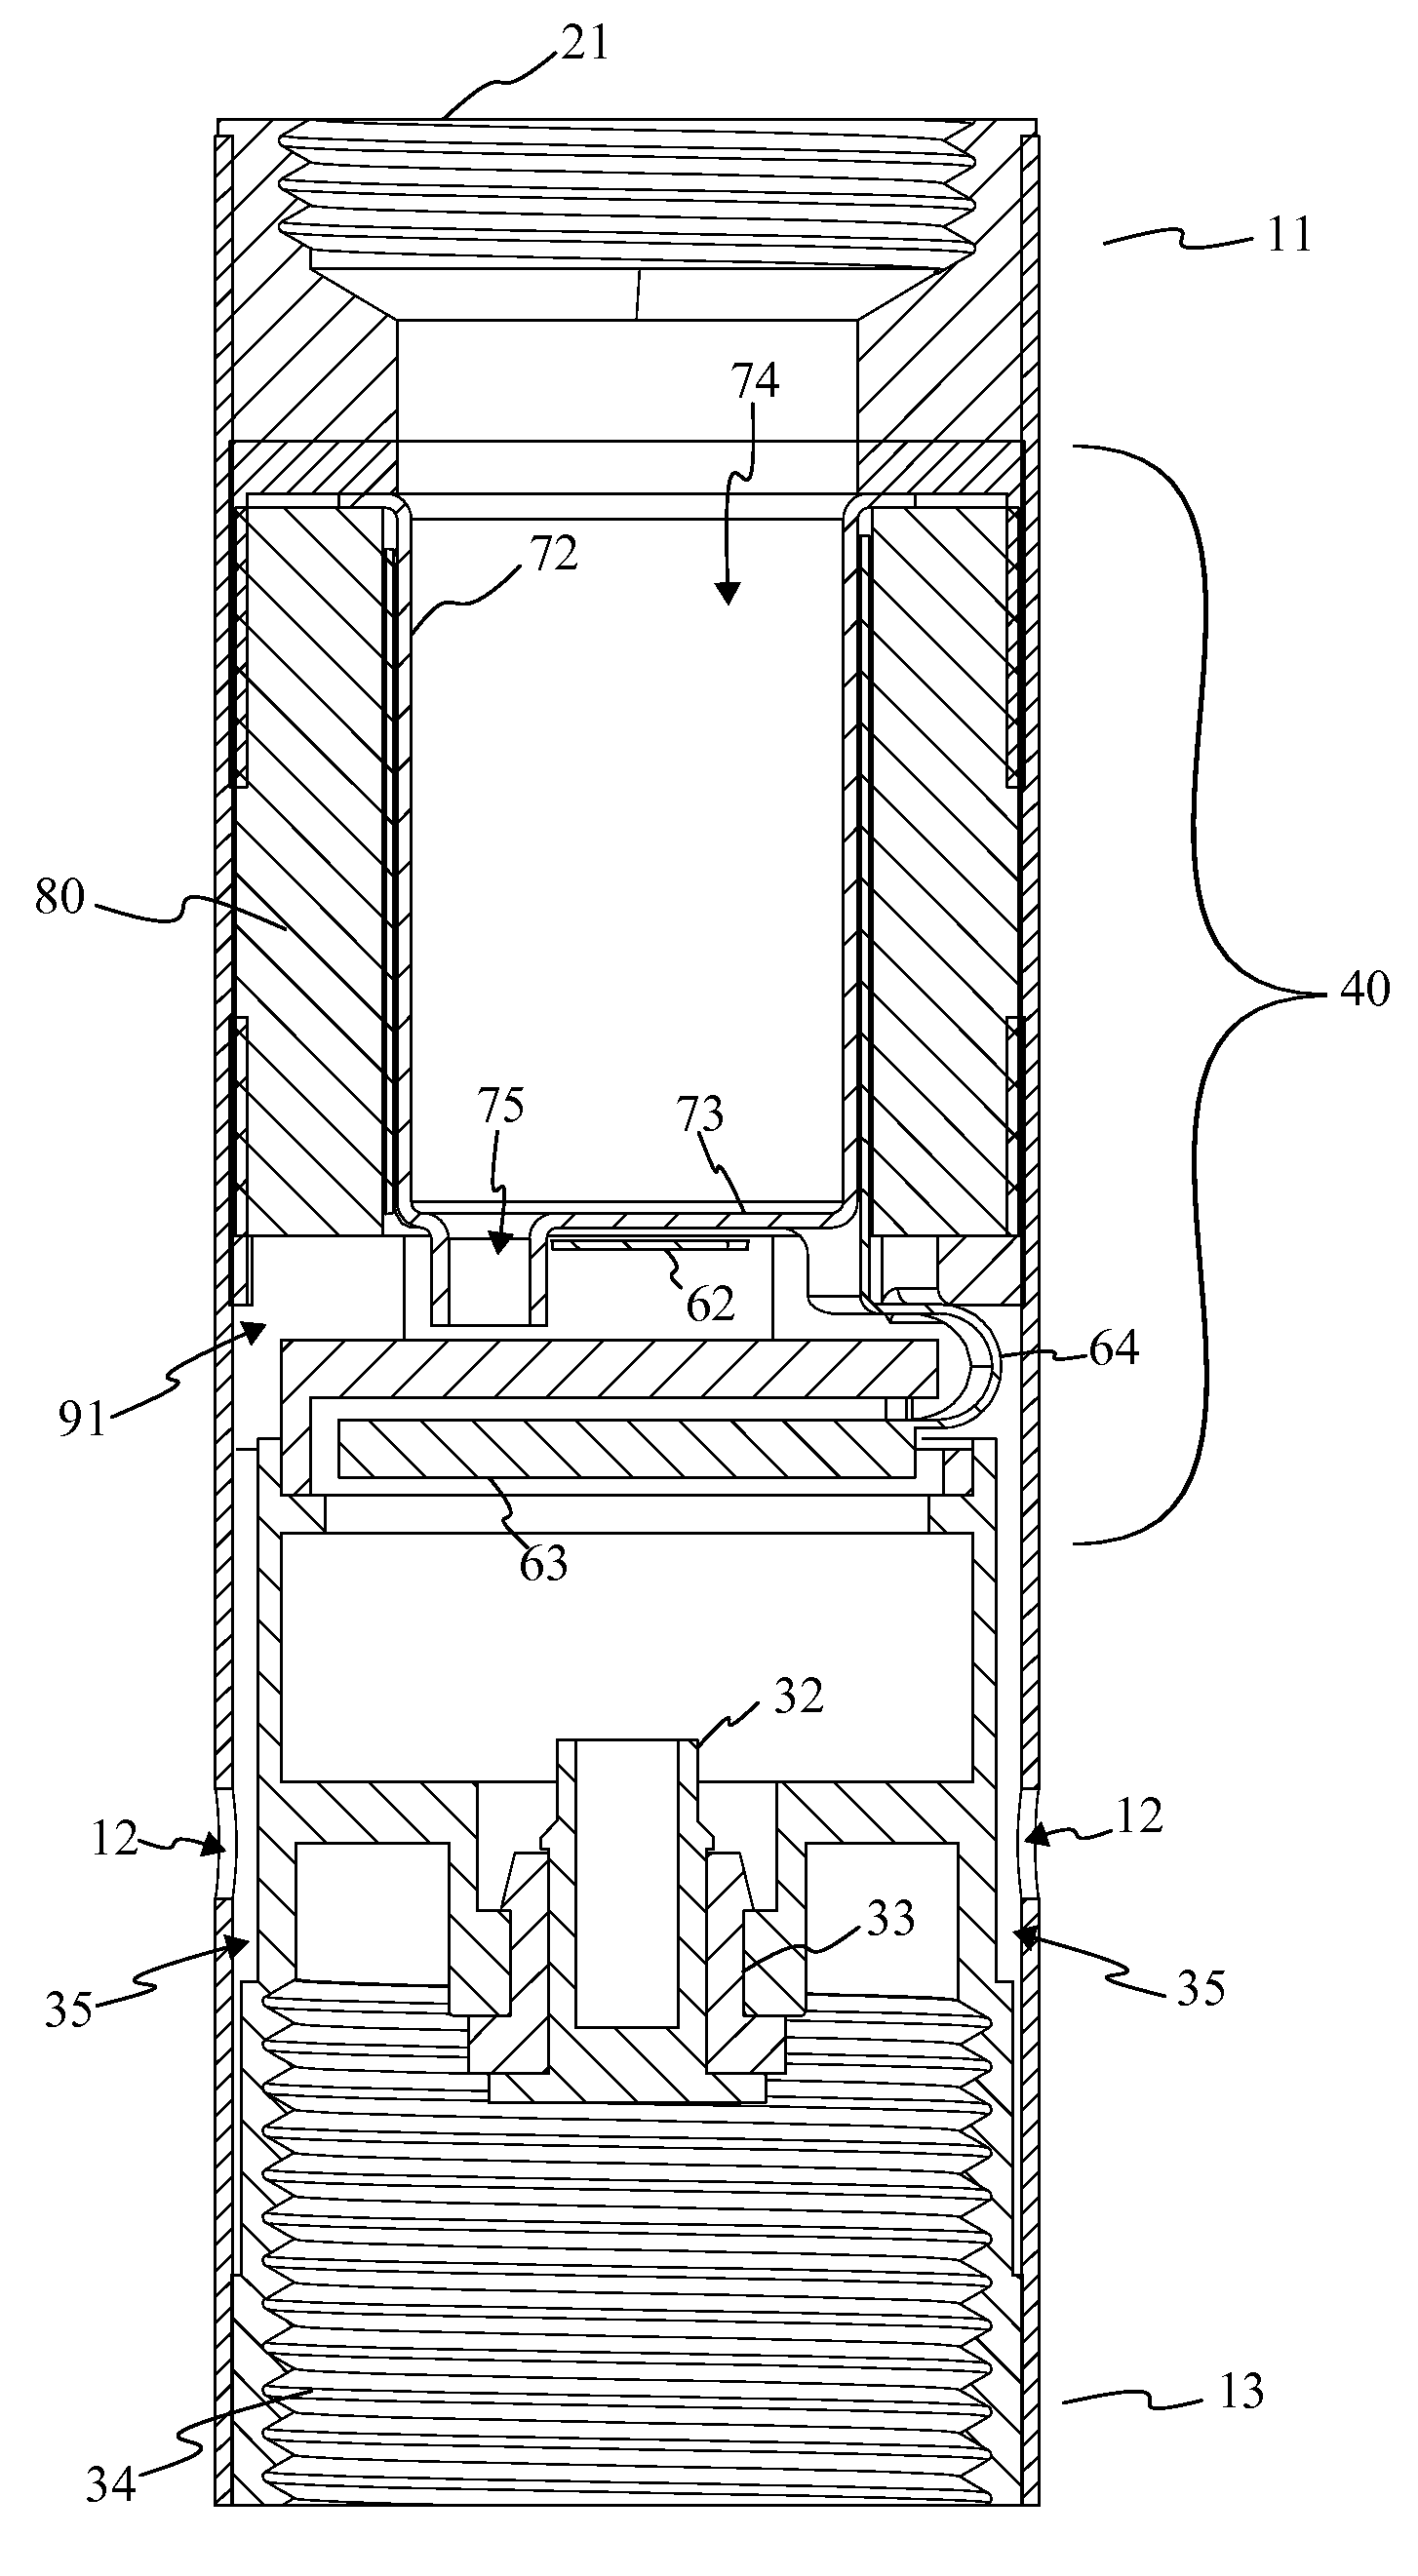 Systems and methods for vaporizing assembly